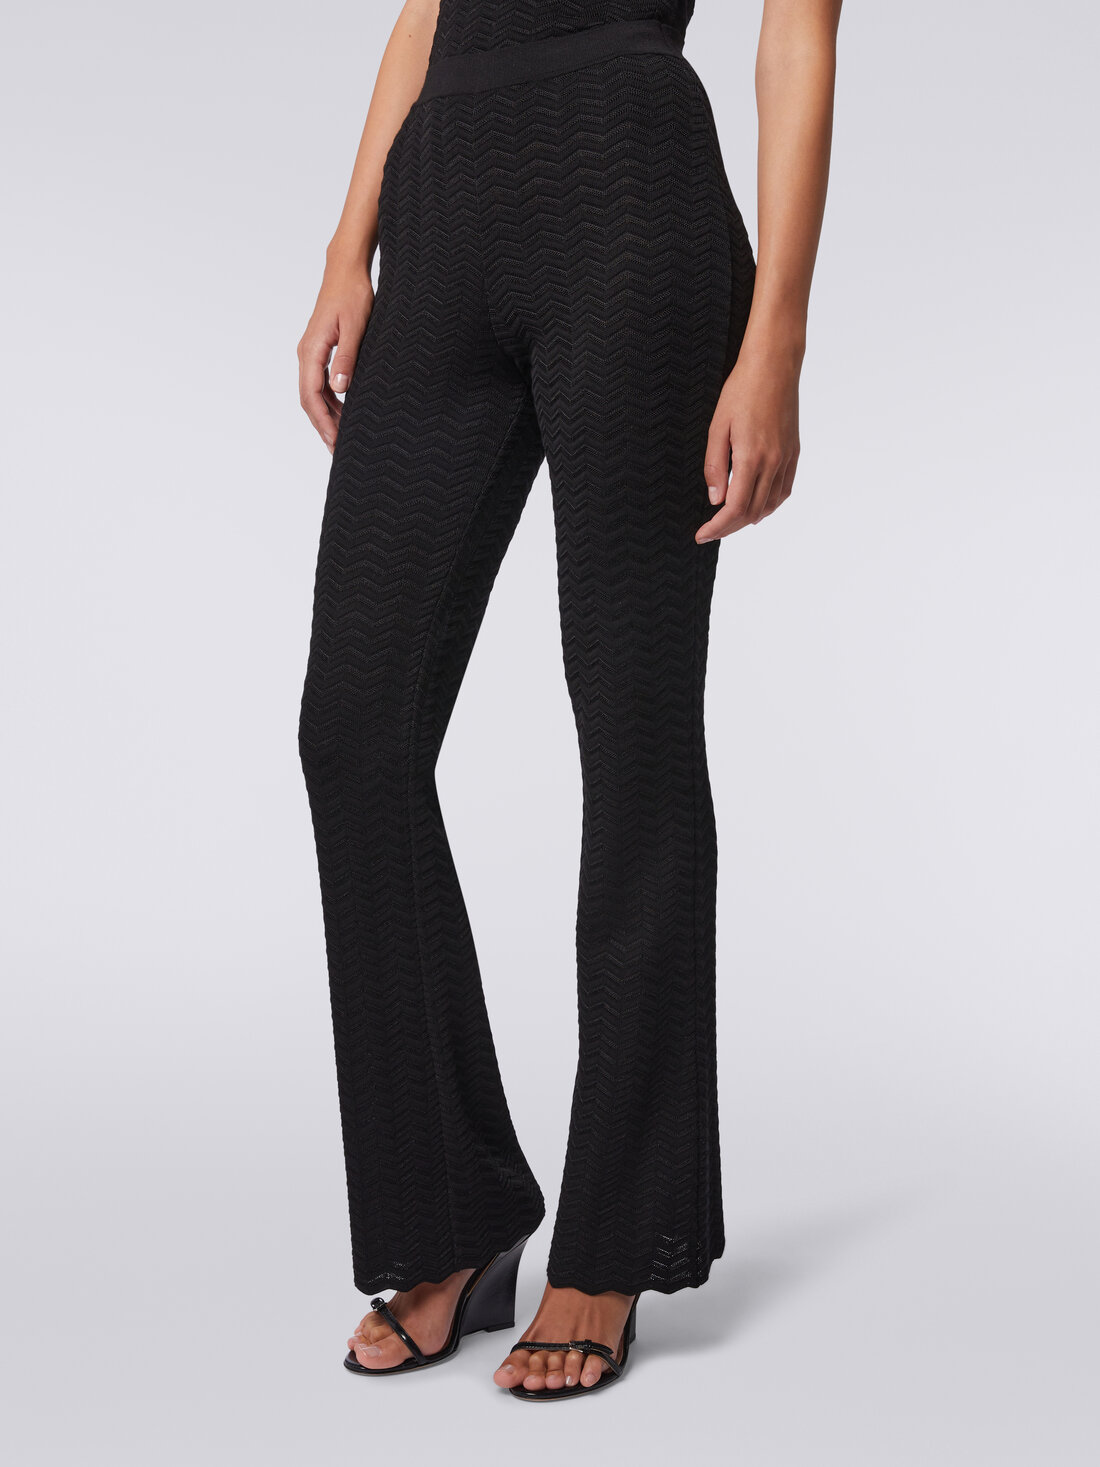 Trousers in zigzag knit  , Black    - DS24SI0NBK033W93911 - 4